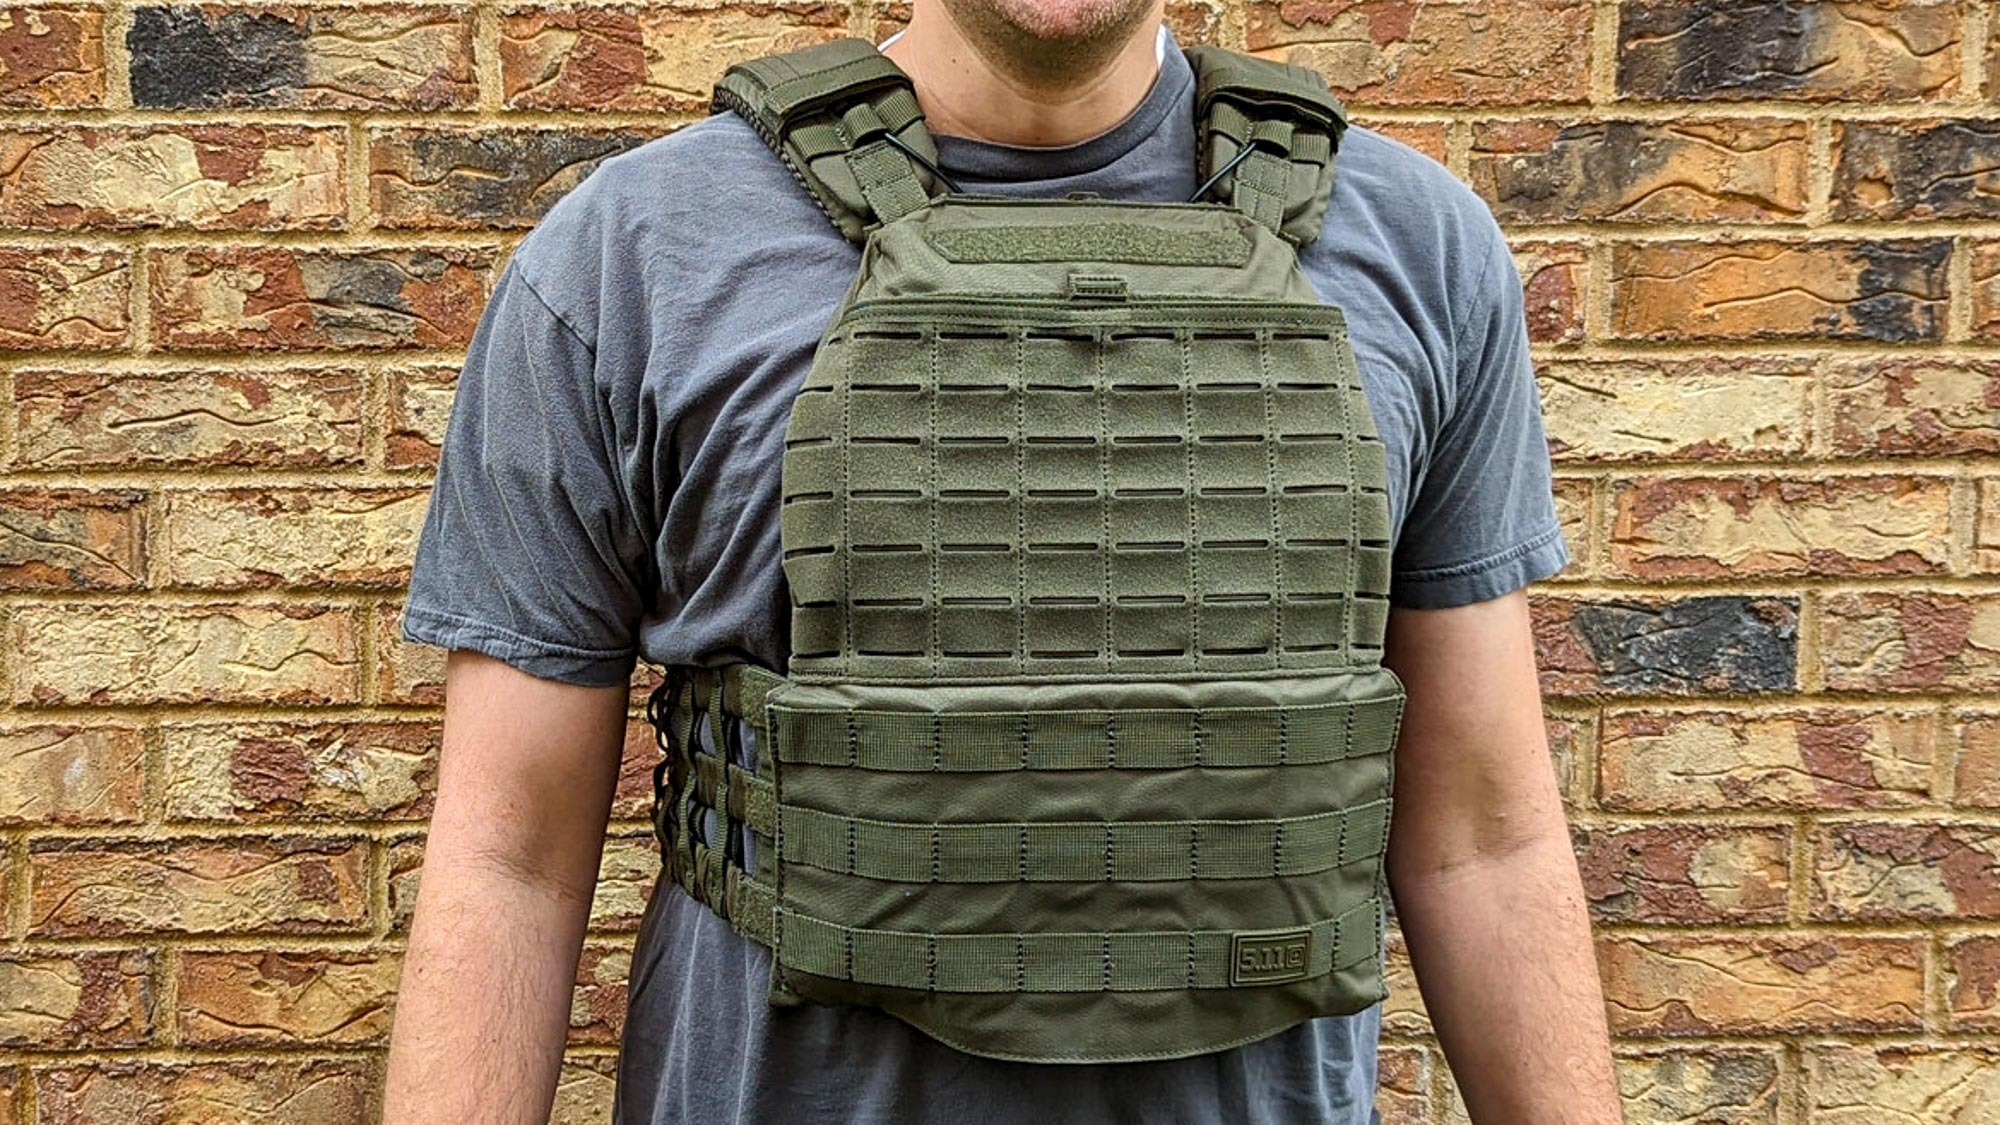 14 best weighted vests for conditioning, cardio and home workouts